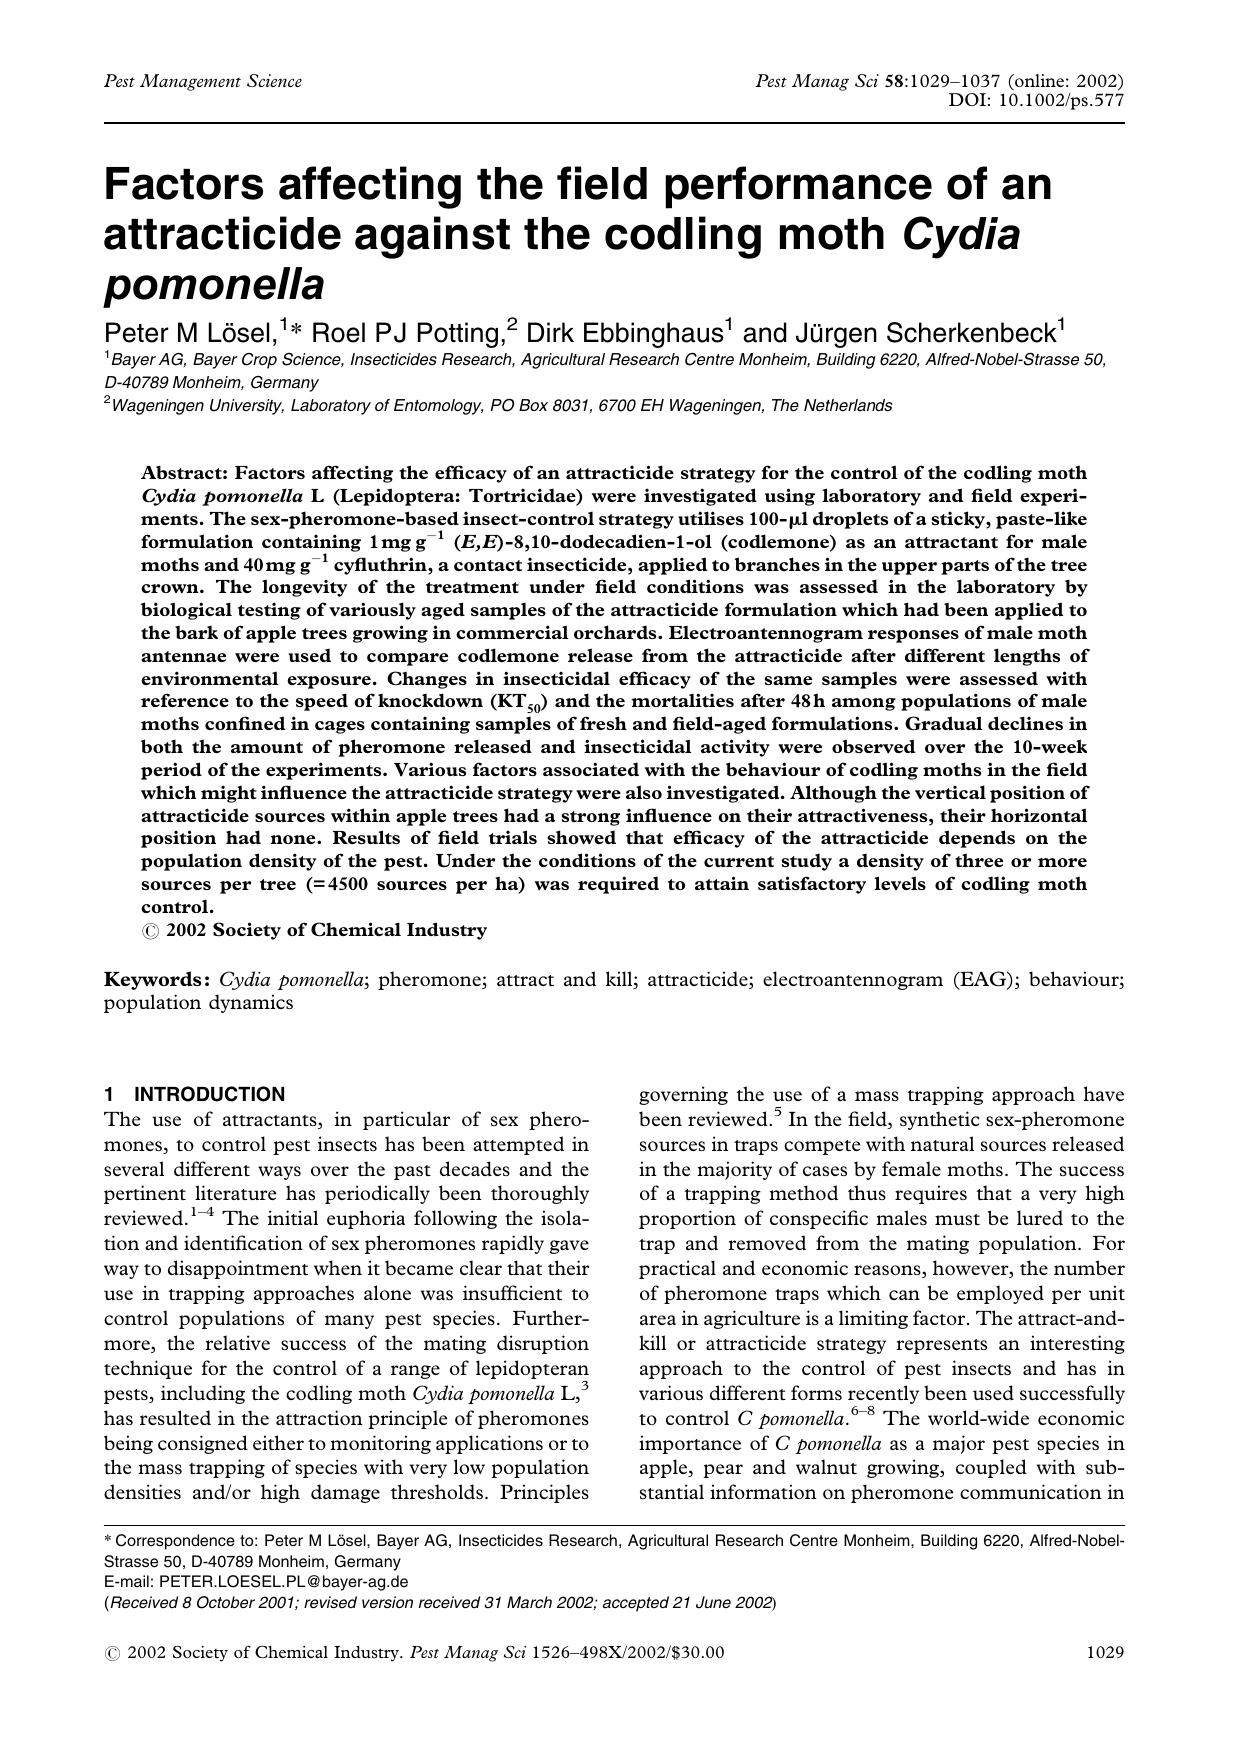 Factors affecting the field performance of an attracticide against the codling moth Cydia pomonella by Unknown